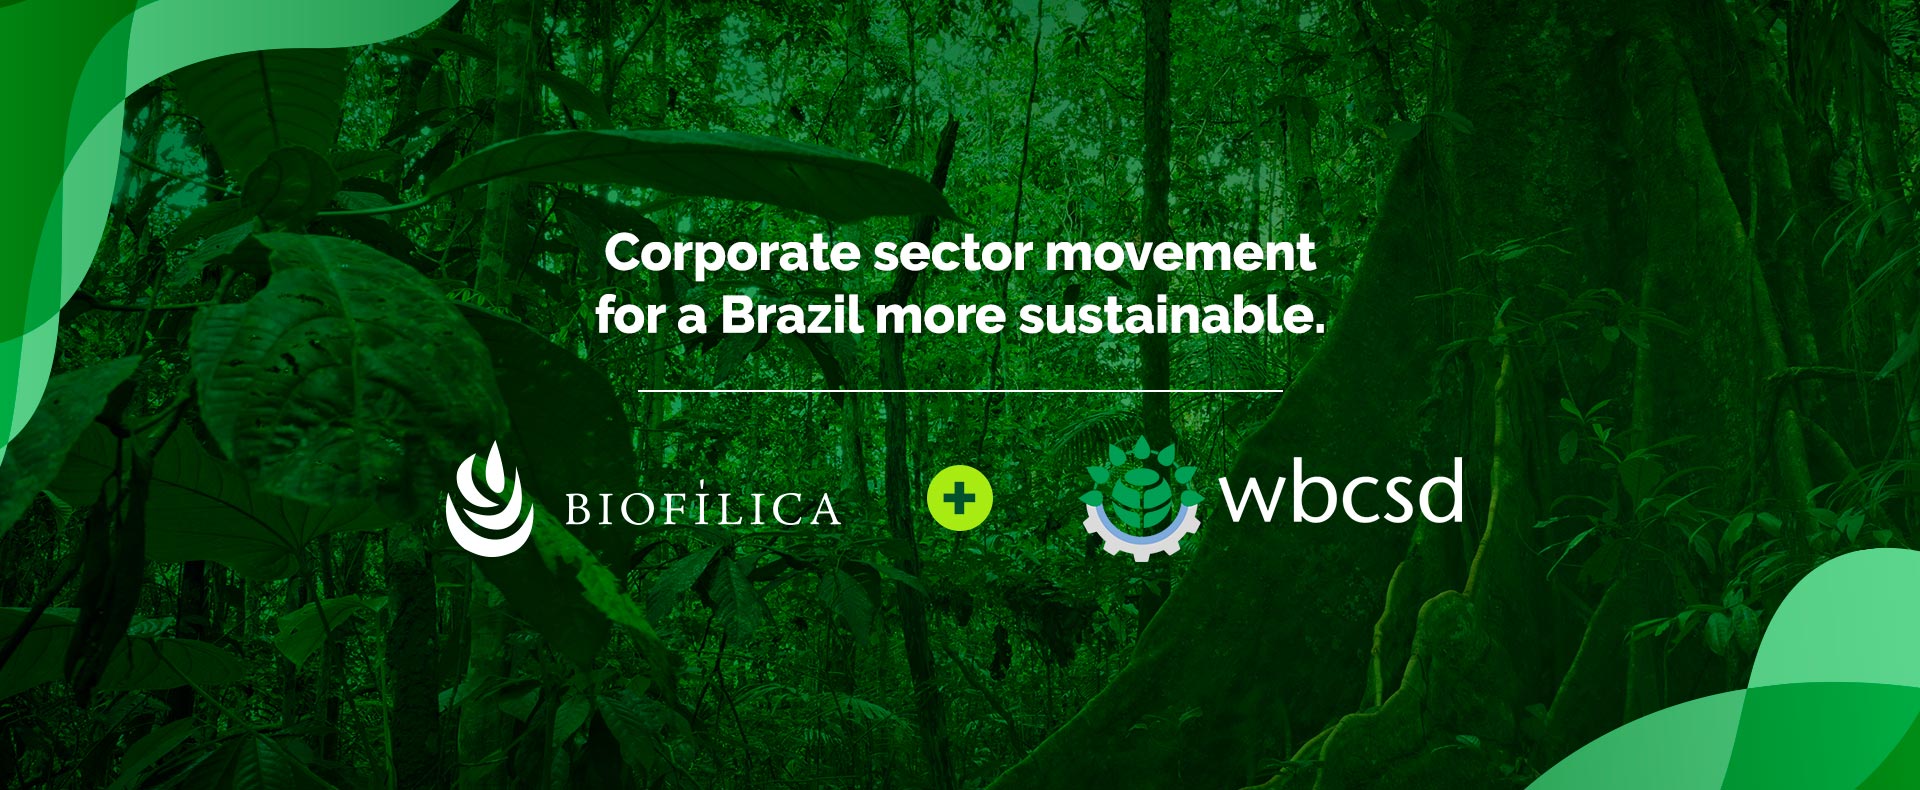 Biofílica joins the corporate sector movement for sustainability, led by WBCSD